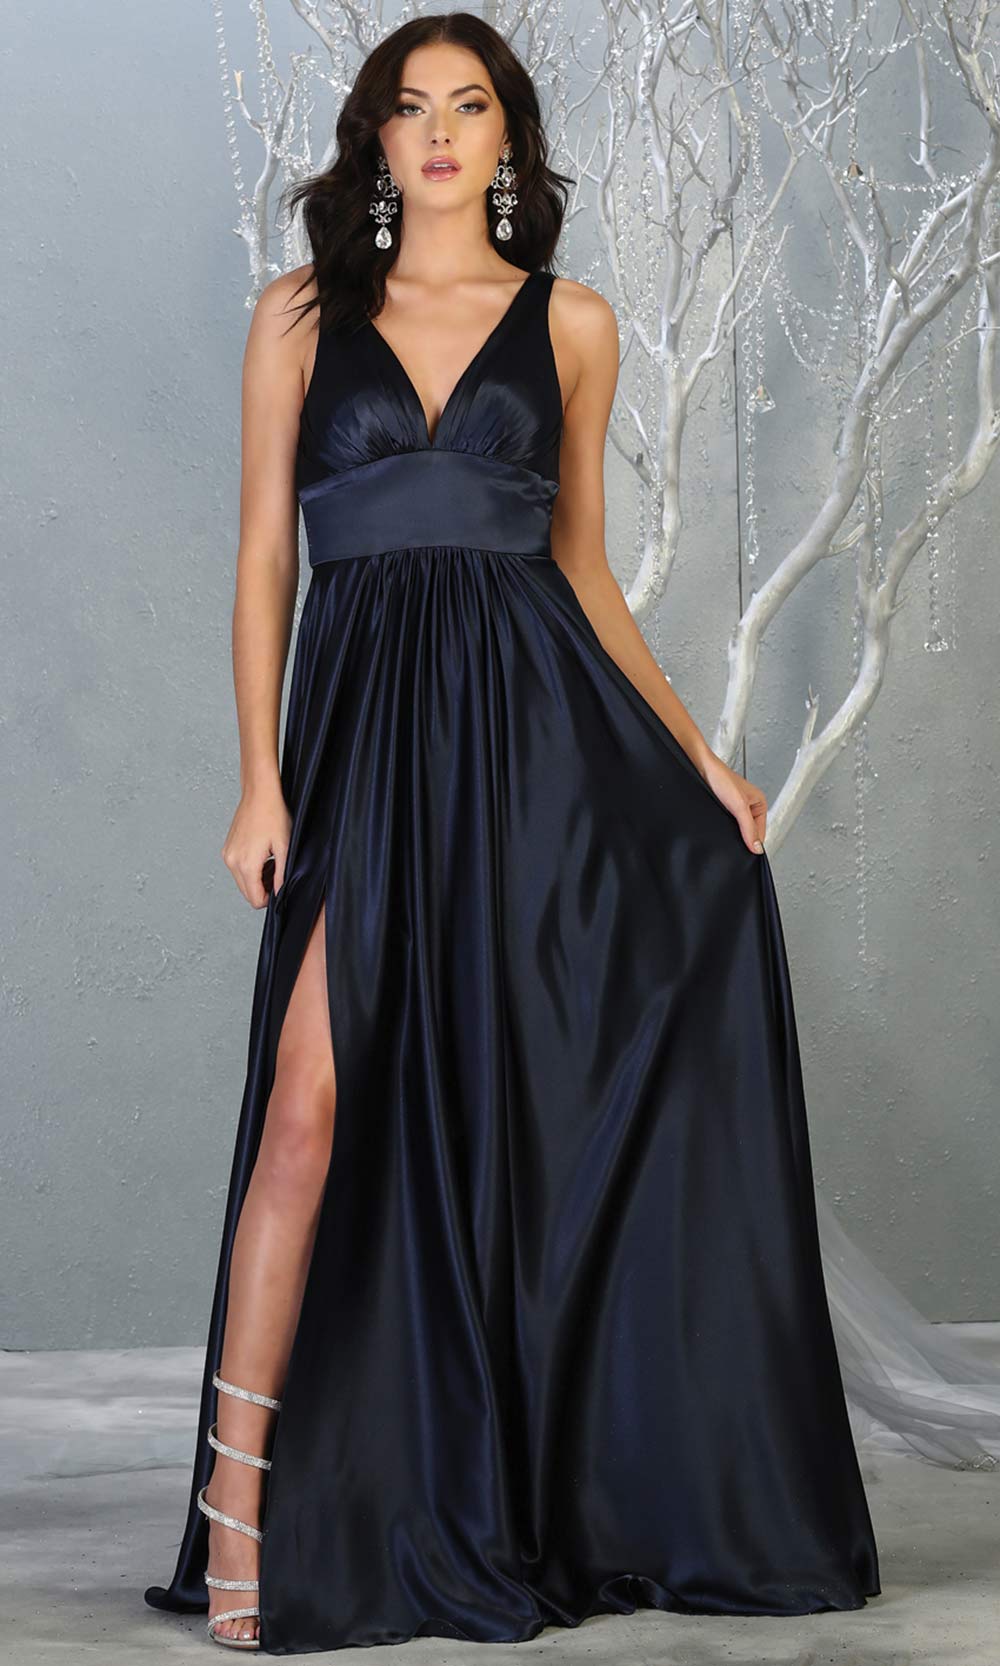 Mayqueen MQ1723 long navy blue satin dress with v neck, wide straps, & high slit. This long dark blue dress is perfect for bridesmaid dresses, summer wedding guest dress, formal evening party dress, prom dress, engagement/e-shoot dress.Plus sizes.jpg